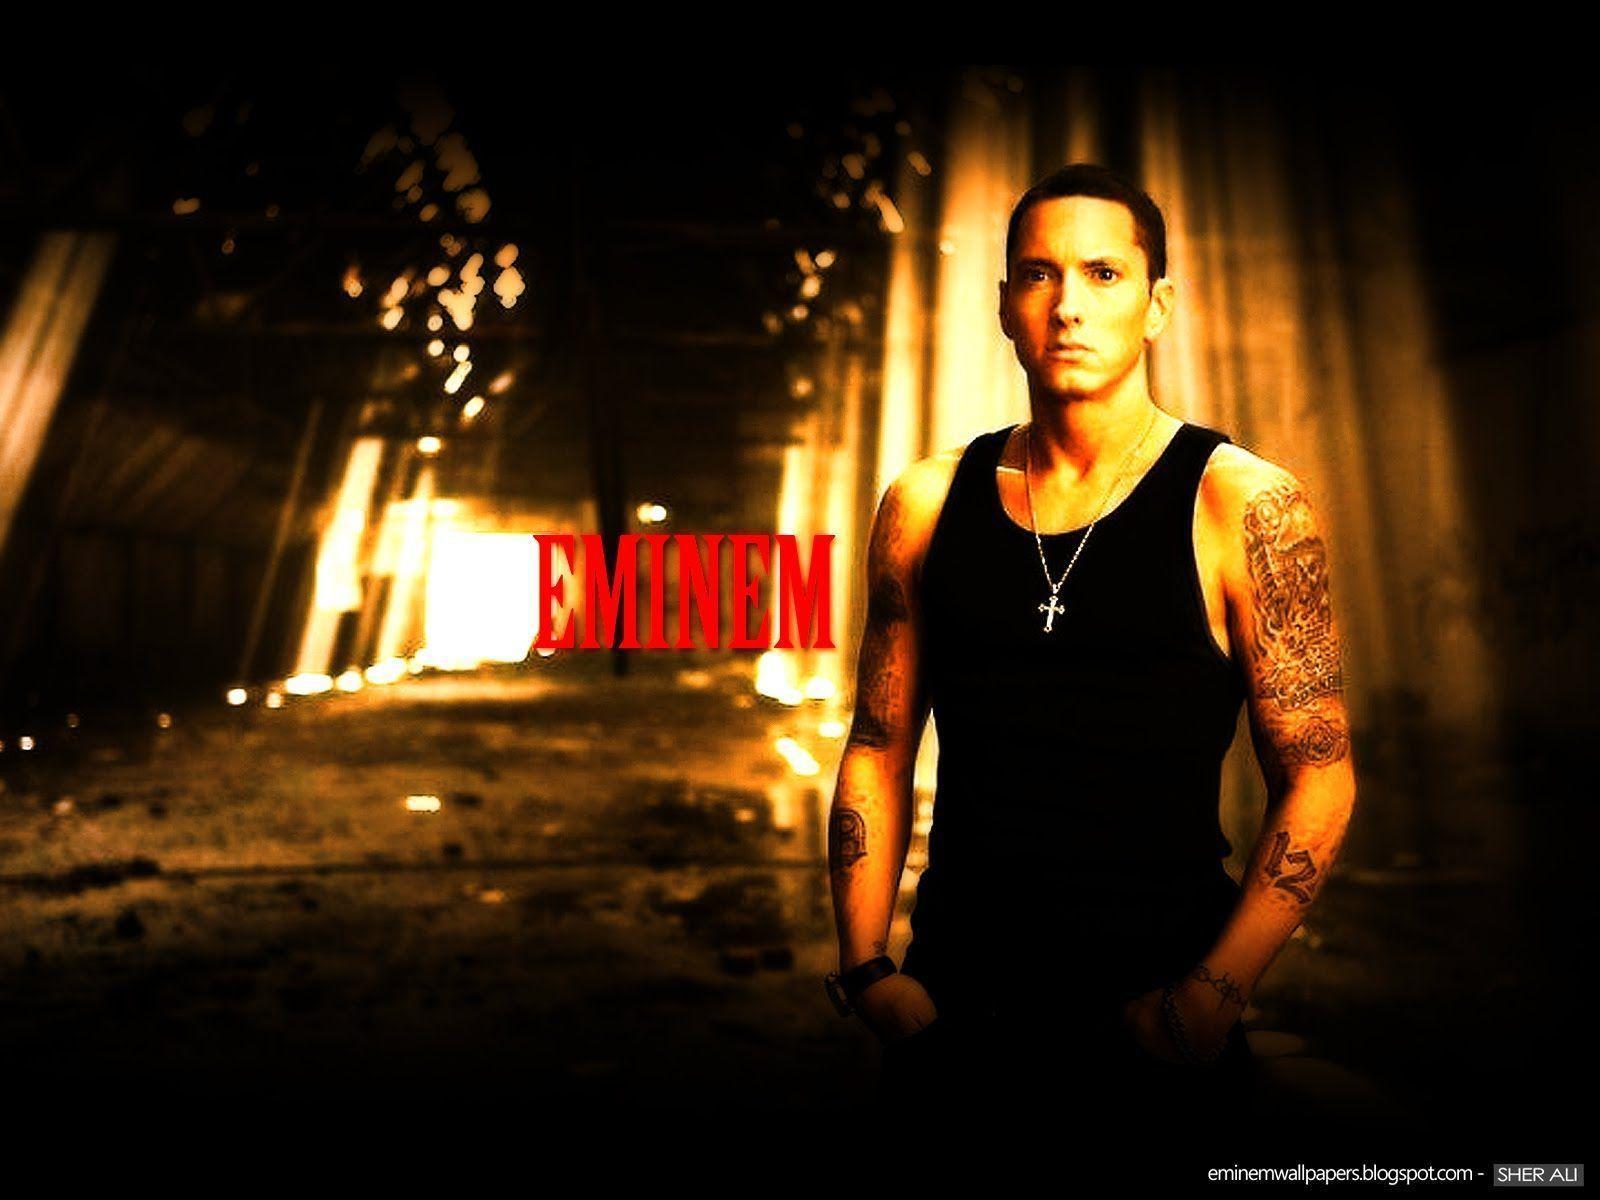 Eminem Image 4386 HD Wallpaper Picture. Top Wallpaper Gallery Photo